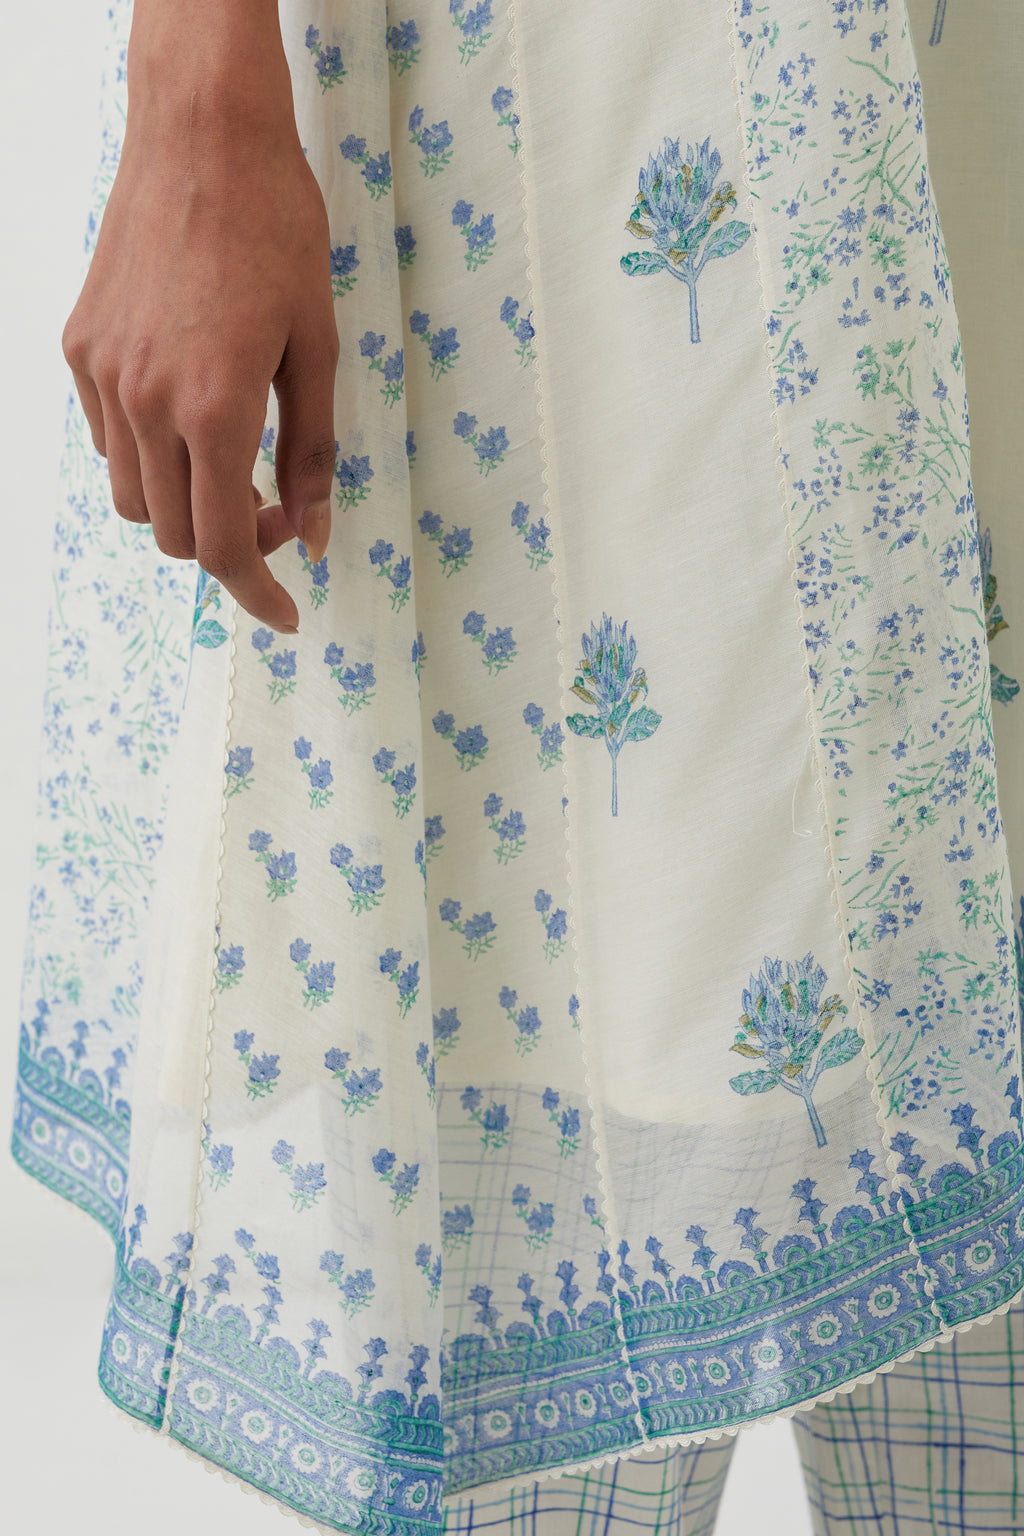 Off white hand block printed cotton chanderi short kalidar kurta set with all-over blue colored flower.